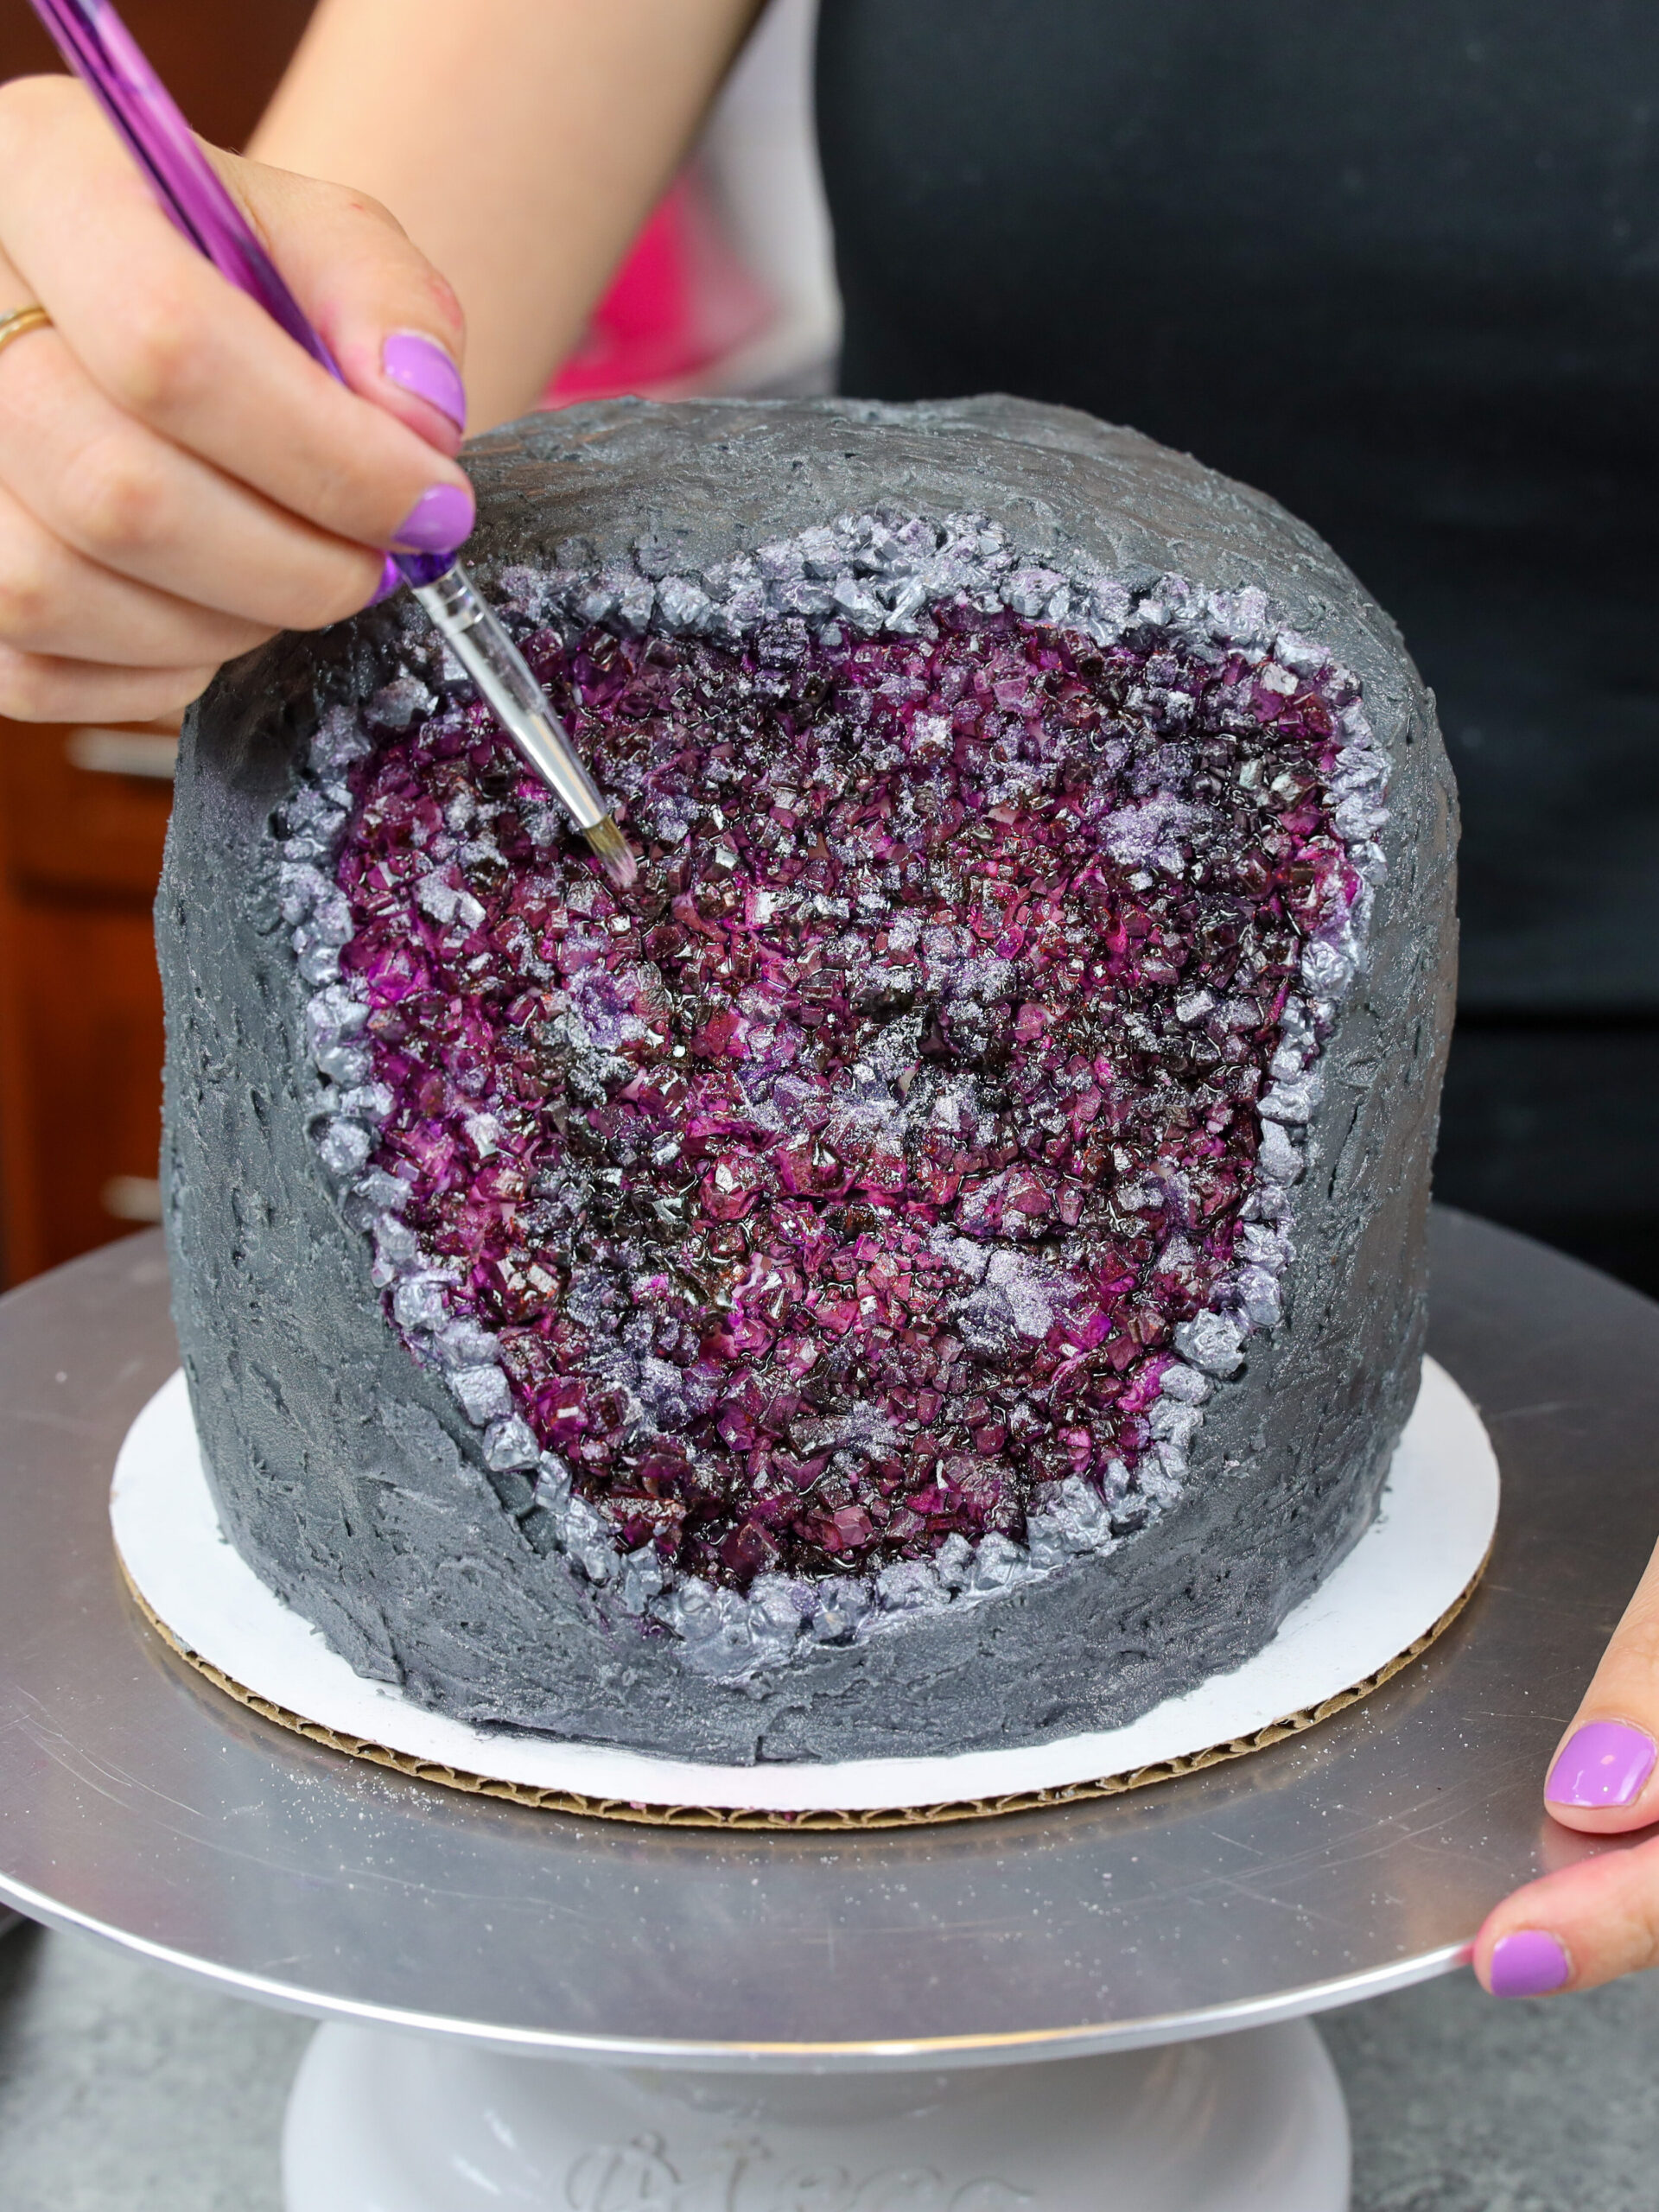 image of a geode cake made with rock candy and edible gel food coloring paint to look like an amethyst